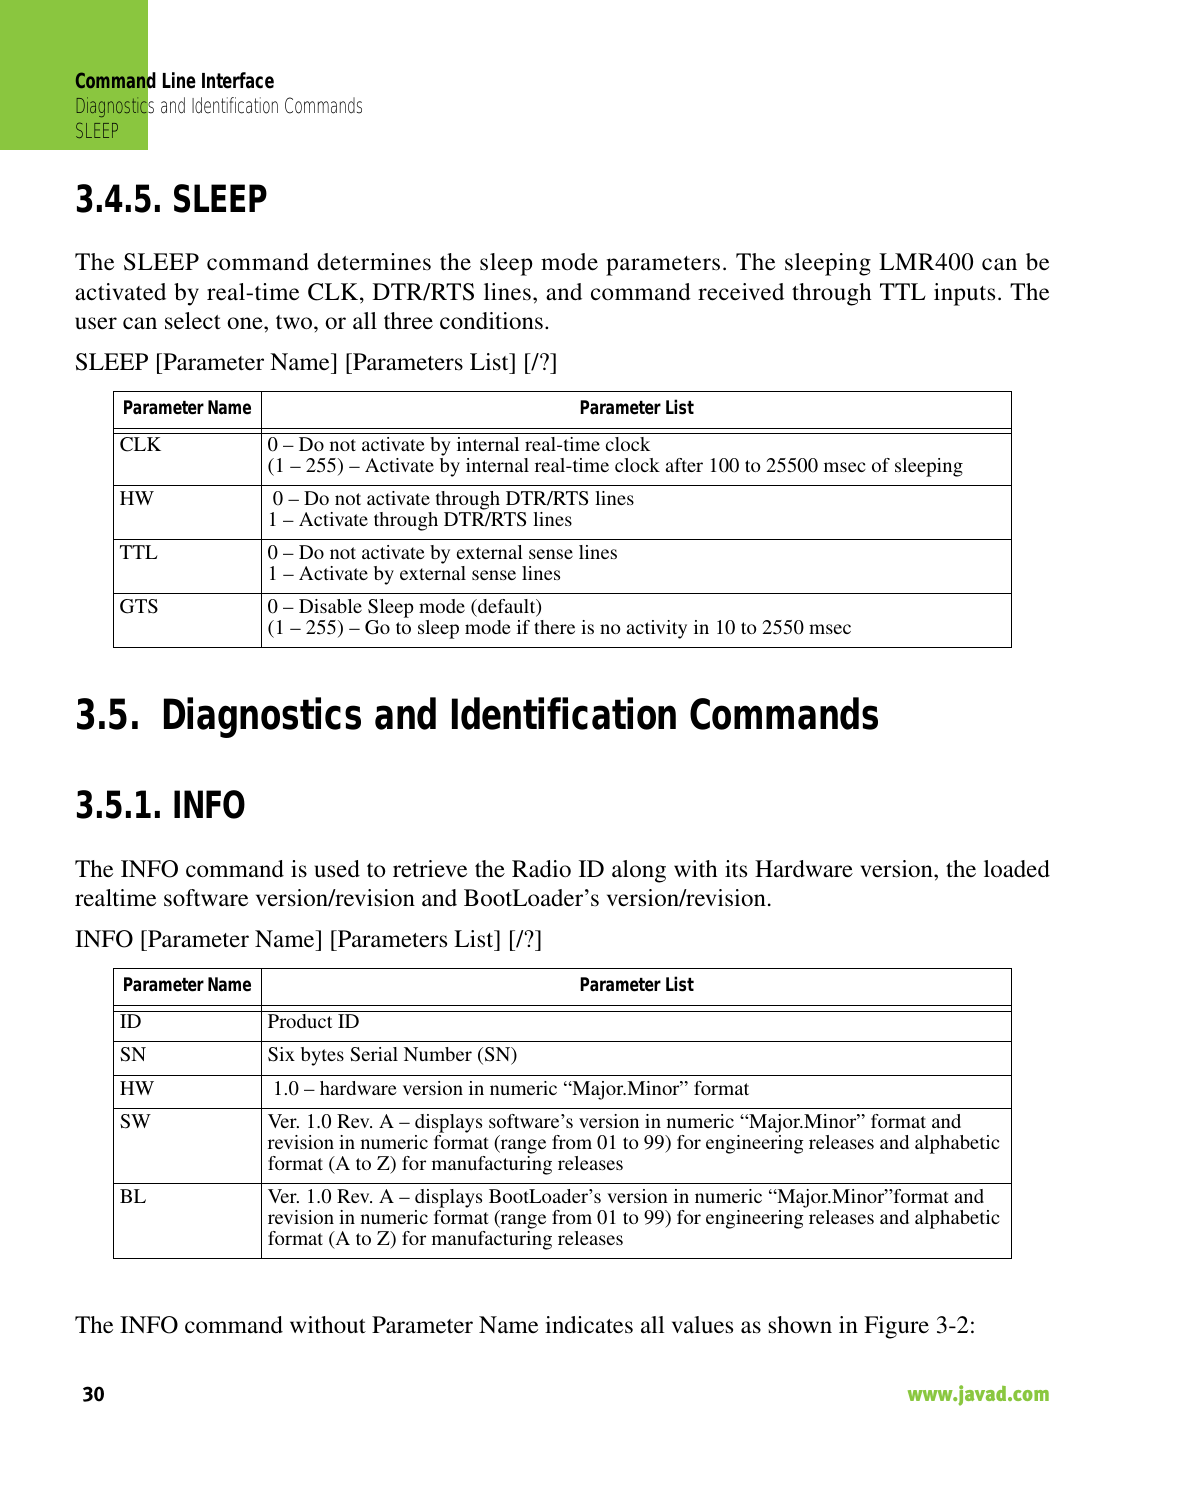 Command Line InterfaceDiagnostics and Identification CommandsSLEEP30                                                                                                                     www.javad.com3.4.5. SLEEPThe SLEEP command determines the sleep mode parameters. The sleeping LMR400 can beactivated by real-time CLK, DTR/RTS lines, and command received through TTL inputs. Theuser can select one, two, or all three conditions.SLEEP [Parameter Name] [Parameters List] [/?] 3.5.  Diagnostics and Identification Commands3.5.1. INFOThe INFO command is used to retrieve the Radio ID along with its Hardware version, the loadedrealtime software version/revision and BootLoader’s version/revision.INFO [Parameter Name] [Parameters List] [/?]The INFO command without Parameter Name indicates all values as shown in Figure 3-2:Parameter Name  Parameter ListCLK 0 – Do not activate by internal real-time clock(1 – 255) – Activate by internal real-time clock after 100 to 25500 msec of sleepingHW  0 – Do not activate through DTR/RTS lines1 – Activate through DTR/RTS linesTTL 0 – Do not activate by external sense lines1 – Activate by external sense linesGTS 0 – Disable Sleep mode (default)(1 – 255) – Go to sleep mode if there is no activity in 10 to 2550 msecParameter Name  Parameter ListID Product IDSN Six bytes Serial Number (SN)HW  1.0 – hardware version in numeric “Major.Minor” formatSW Ver. 1.0 Rev. A – displays software’s version in numeric “Major.Minor” format and revision in numeric format (range from 01 to 99) for engineering releases and alphabetic format (A to Z) for manufacturing releasesBL  Ver. 1.0 Rev. A – displays BootLoader’s version in numeric “Major.Minor”format and revision in numeric format (range from 01 to 99) for engineering releases and alphabetic format (A to Z) for manufacturing releases